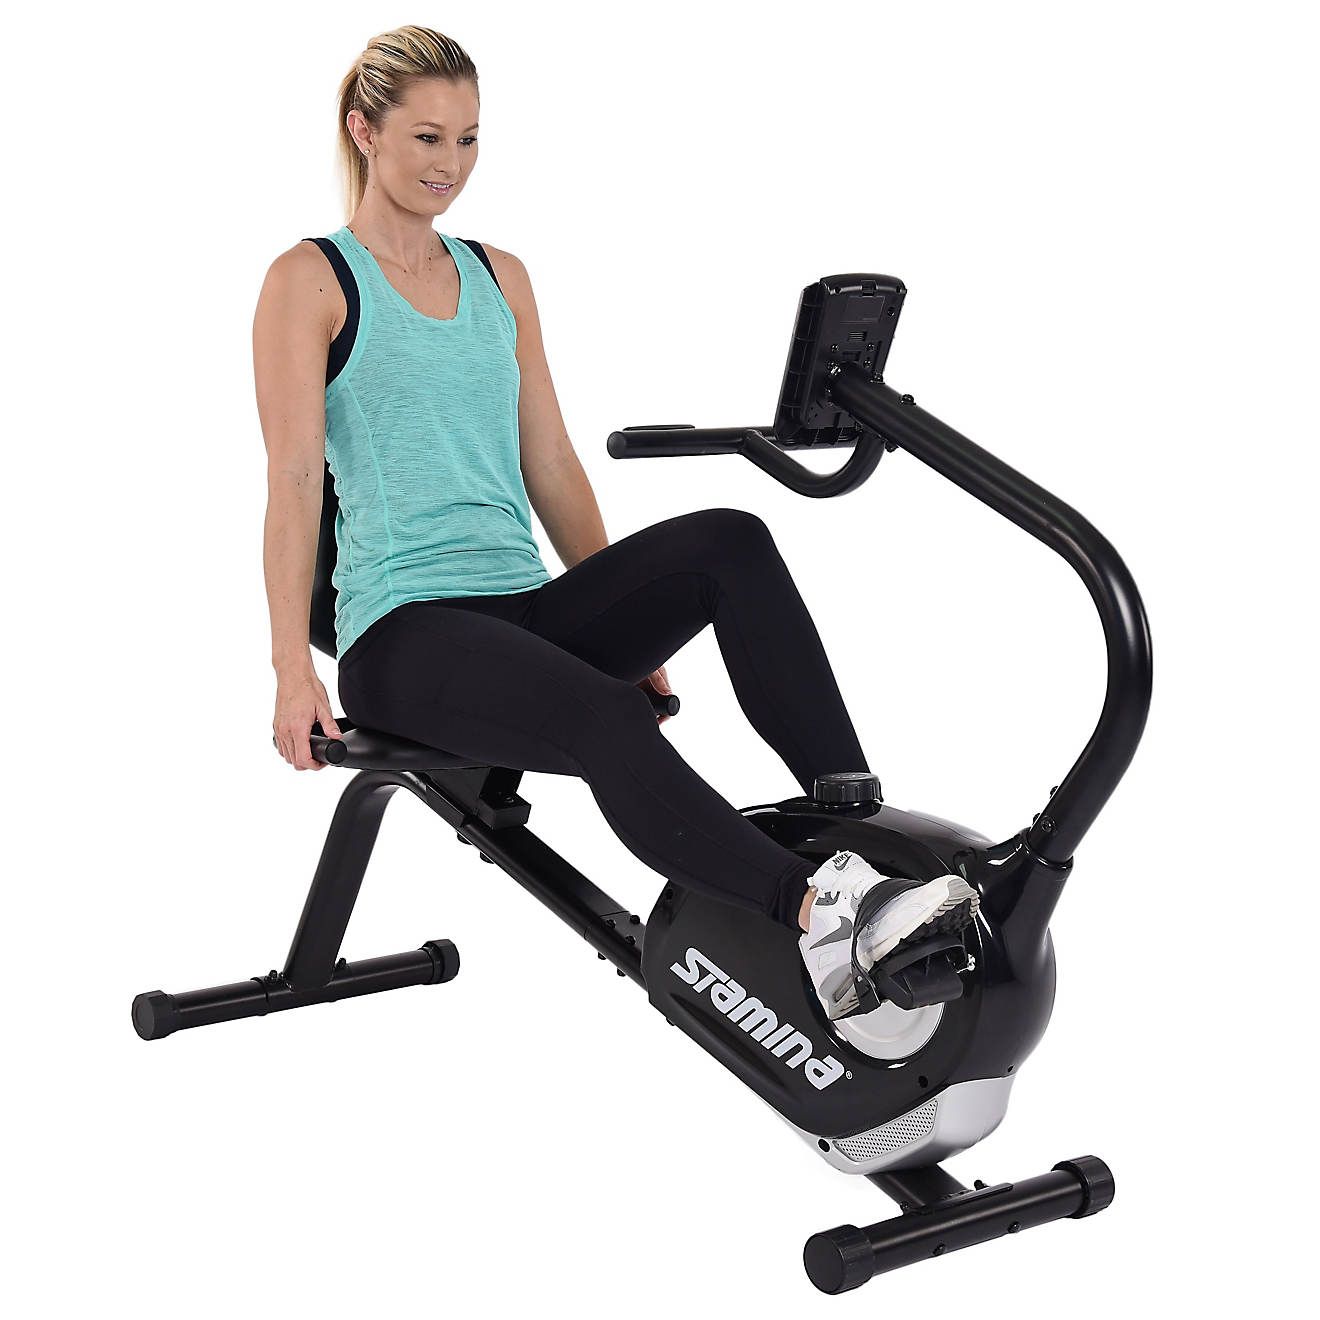 Stamina 1360 Magnetic Recumbent Exercise Bike | Academy Sports + Outdoor Affiliate